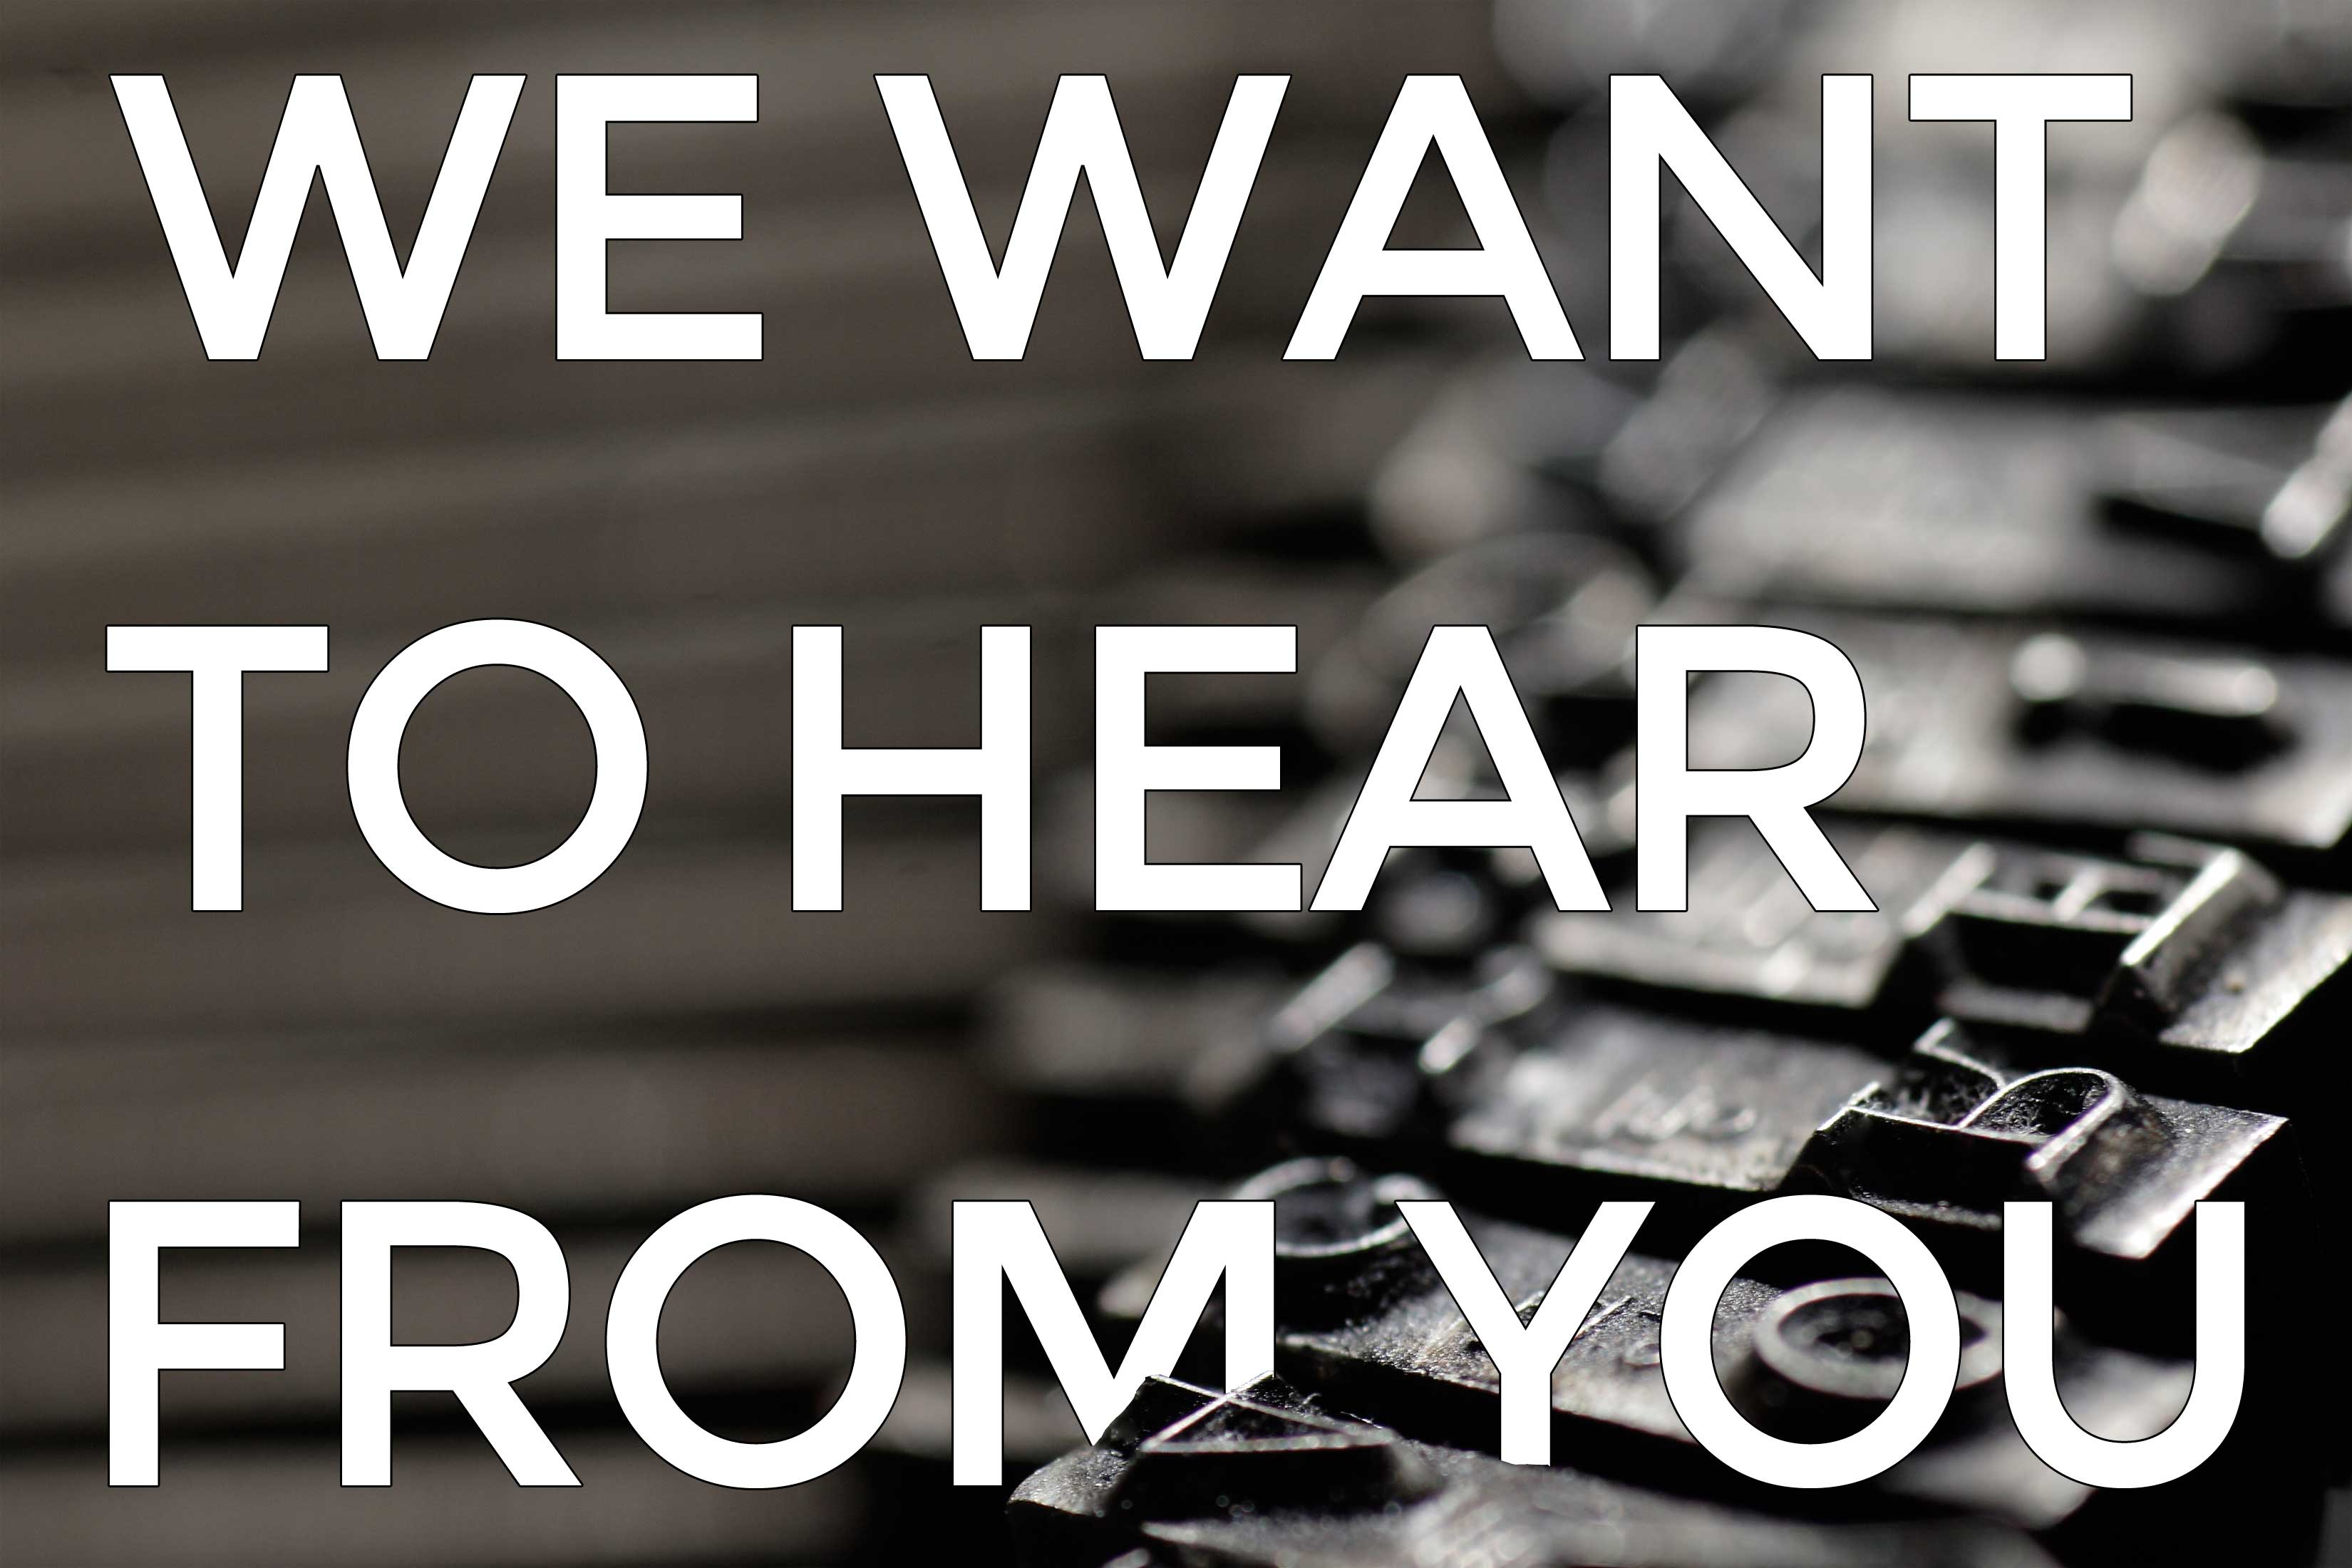 We want to hear from you!